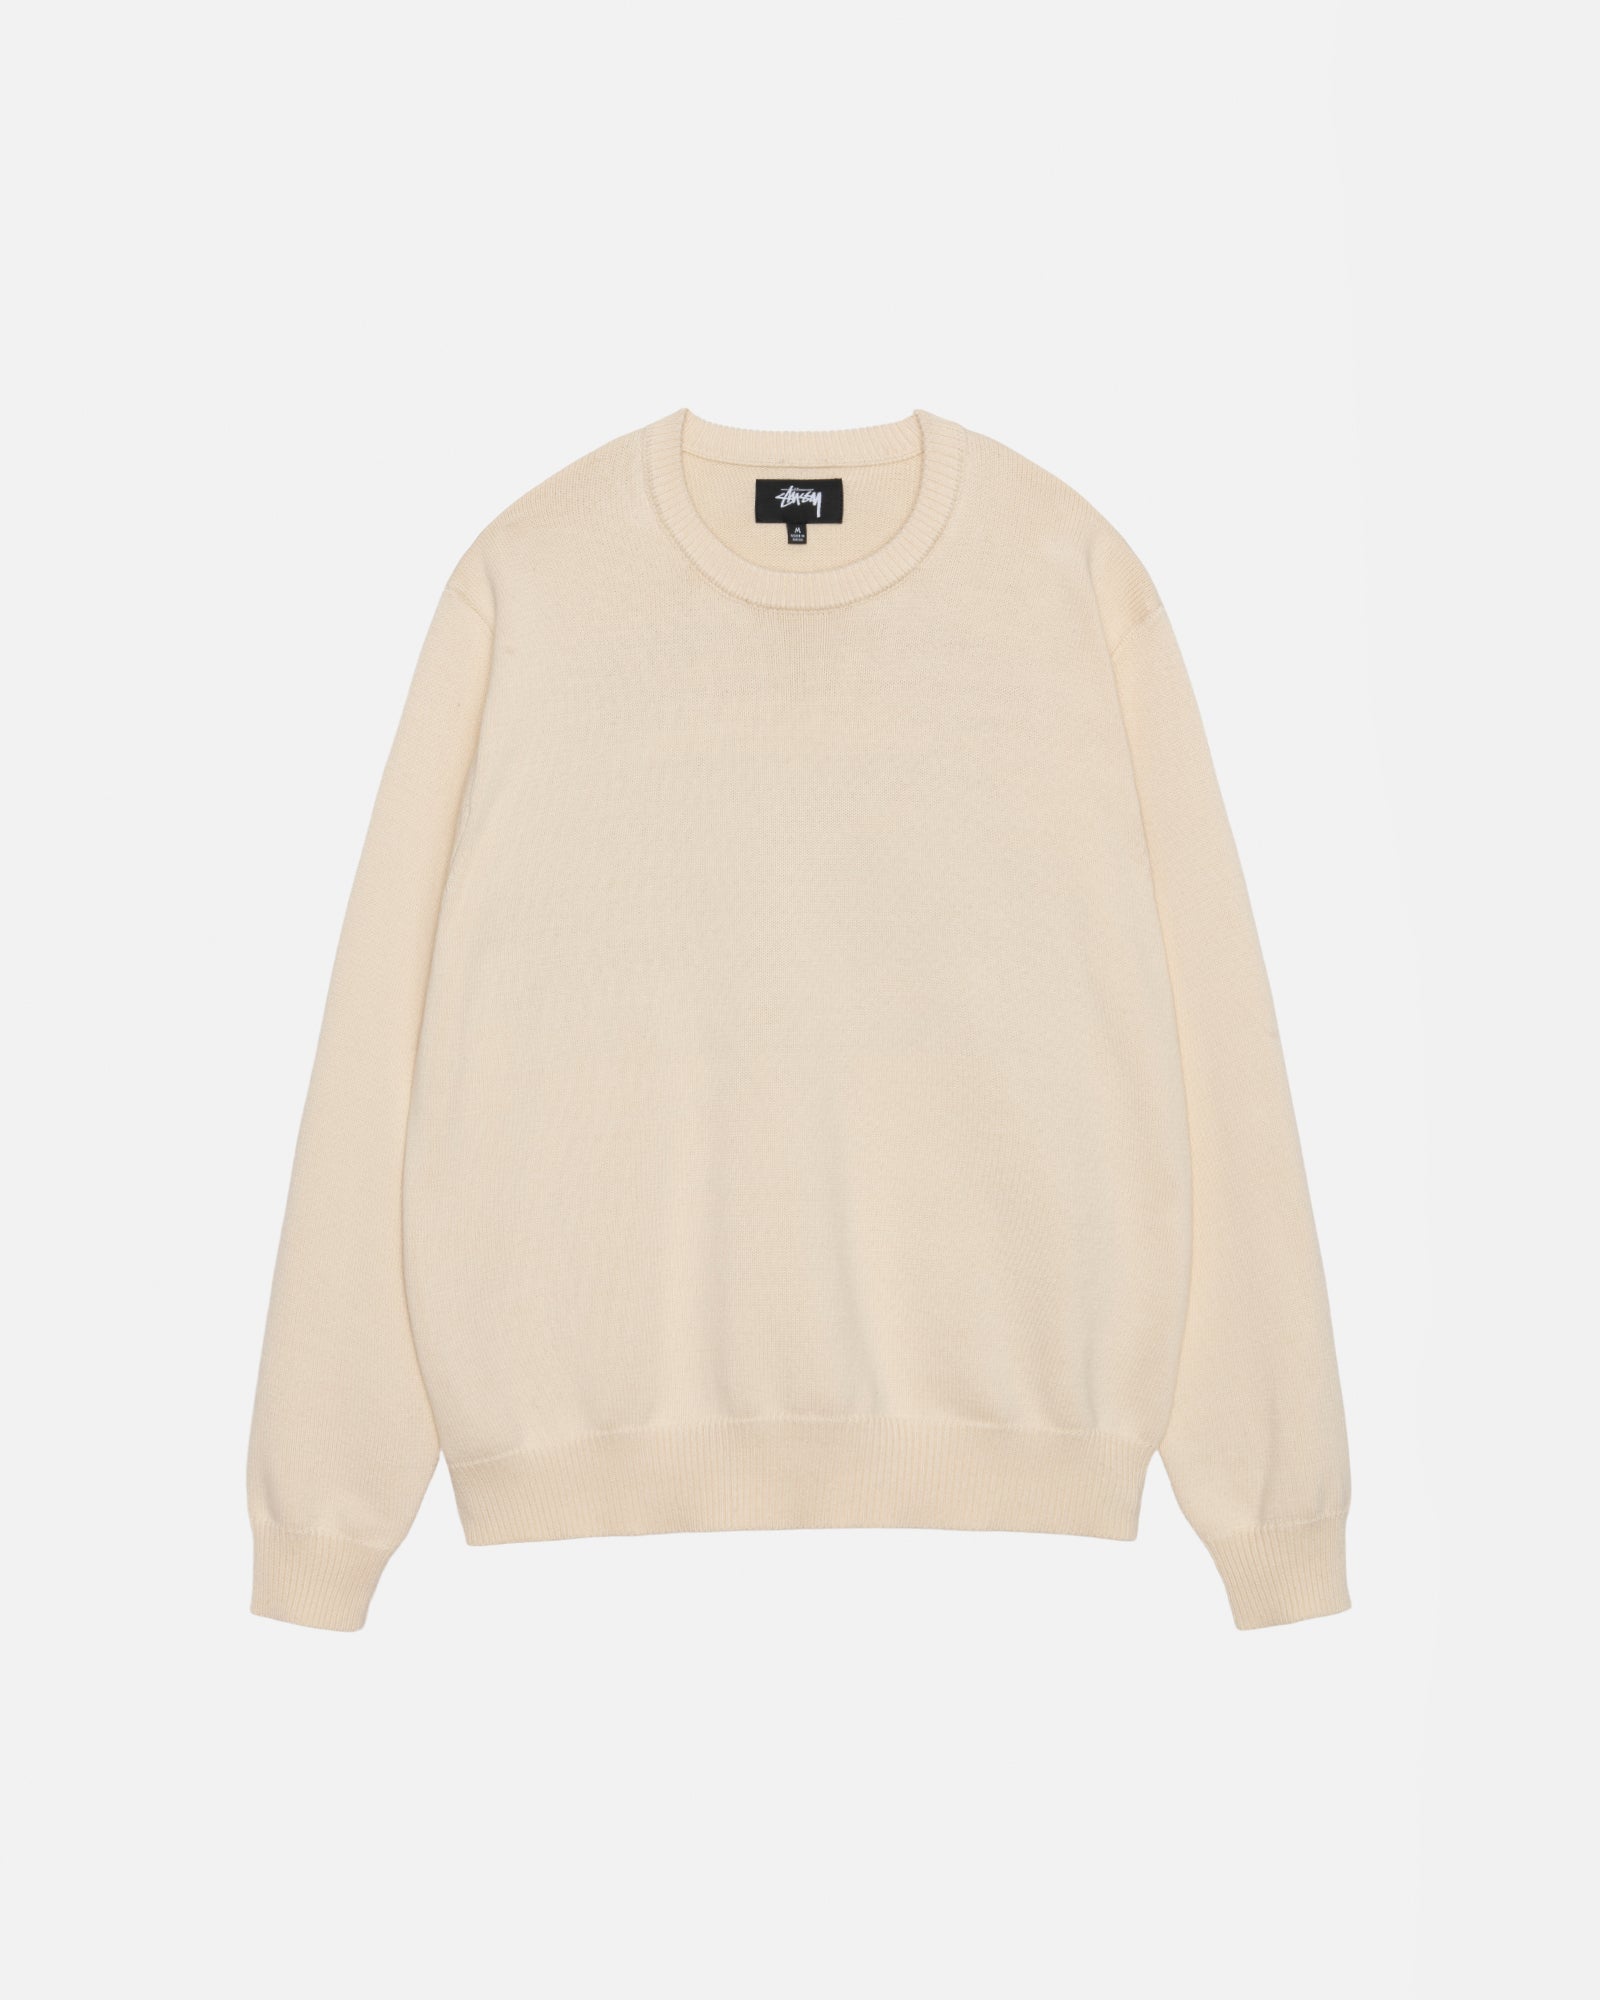 AUTHENTIC WORKGEAR SWEATER